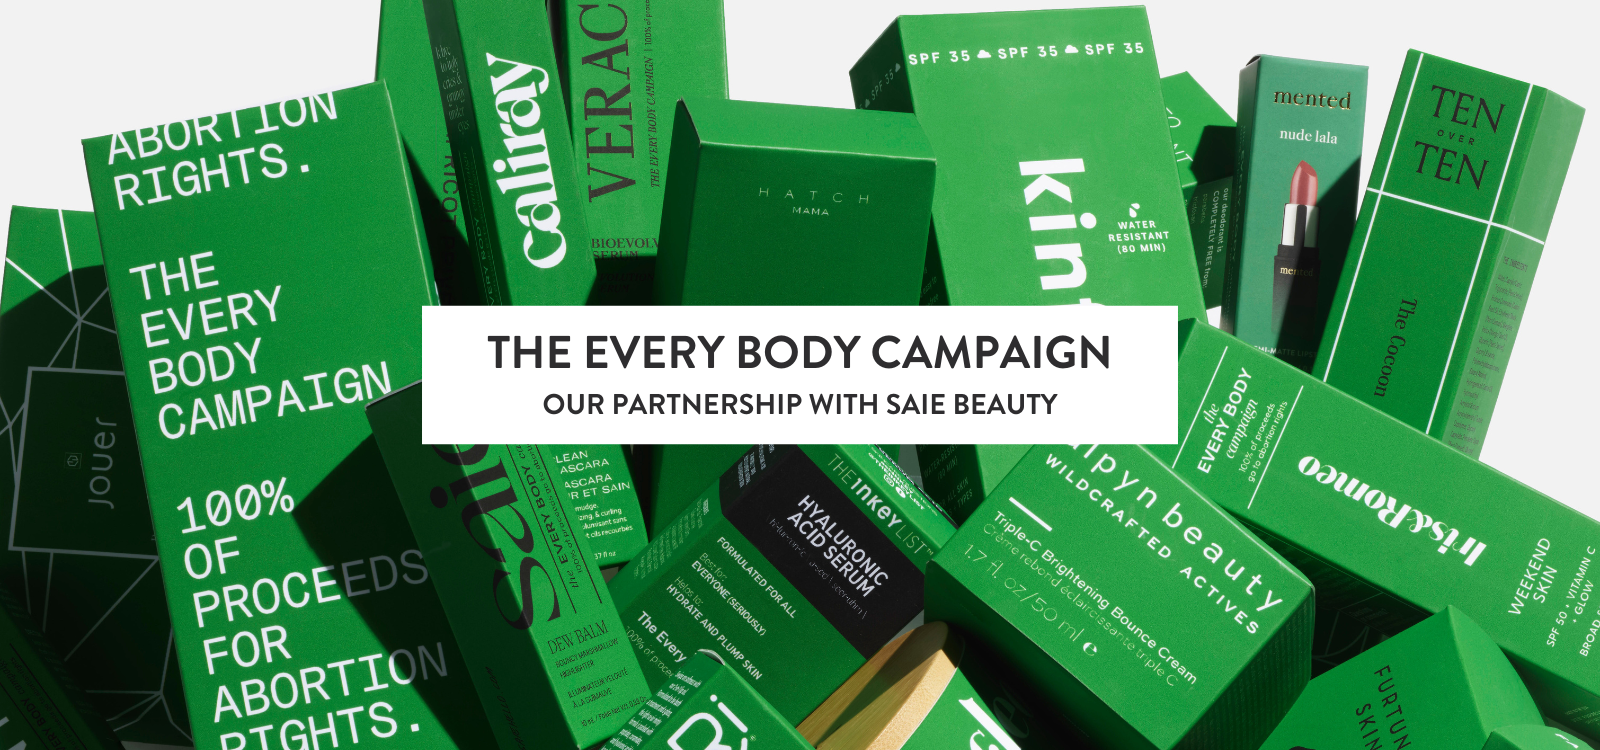 The Every Body Campaign: Our Partnership With Saie Beauty